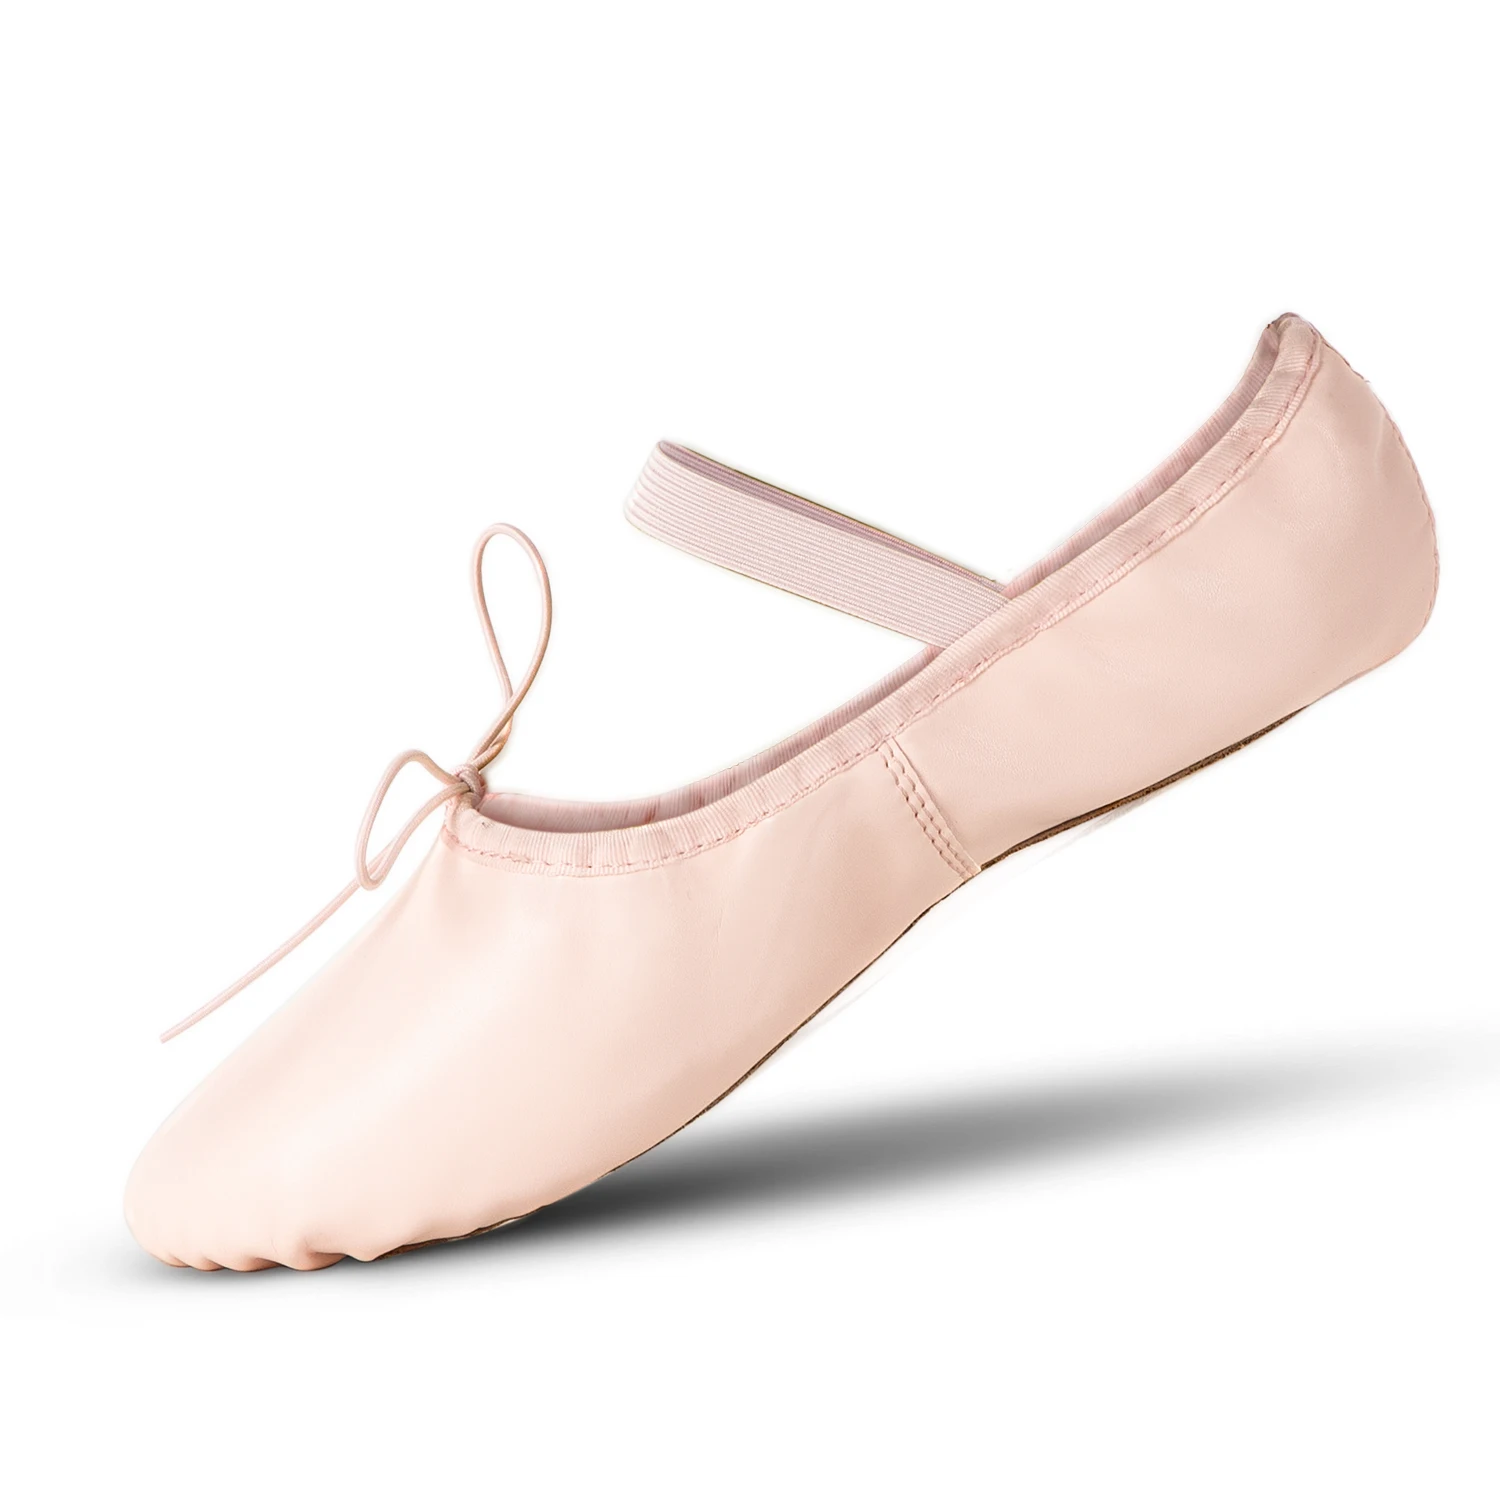 

Supple Genuine Leather Whole sole Ballet Shoes/Ballet Slippers/Dance Shoes with Elastic strip for Women and Girls, Pink,nude,black